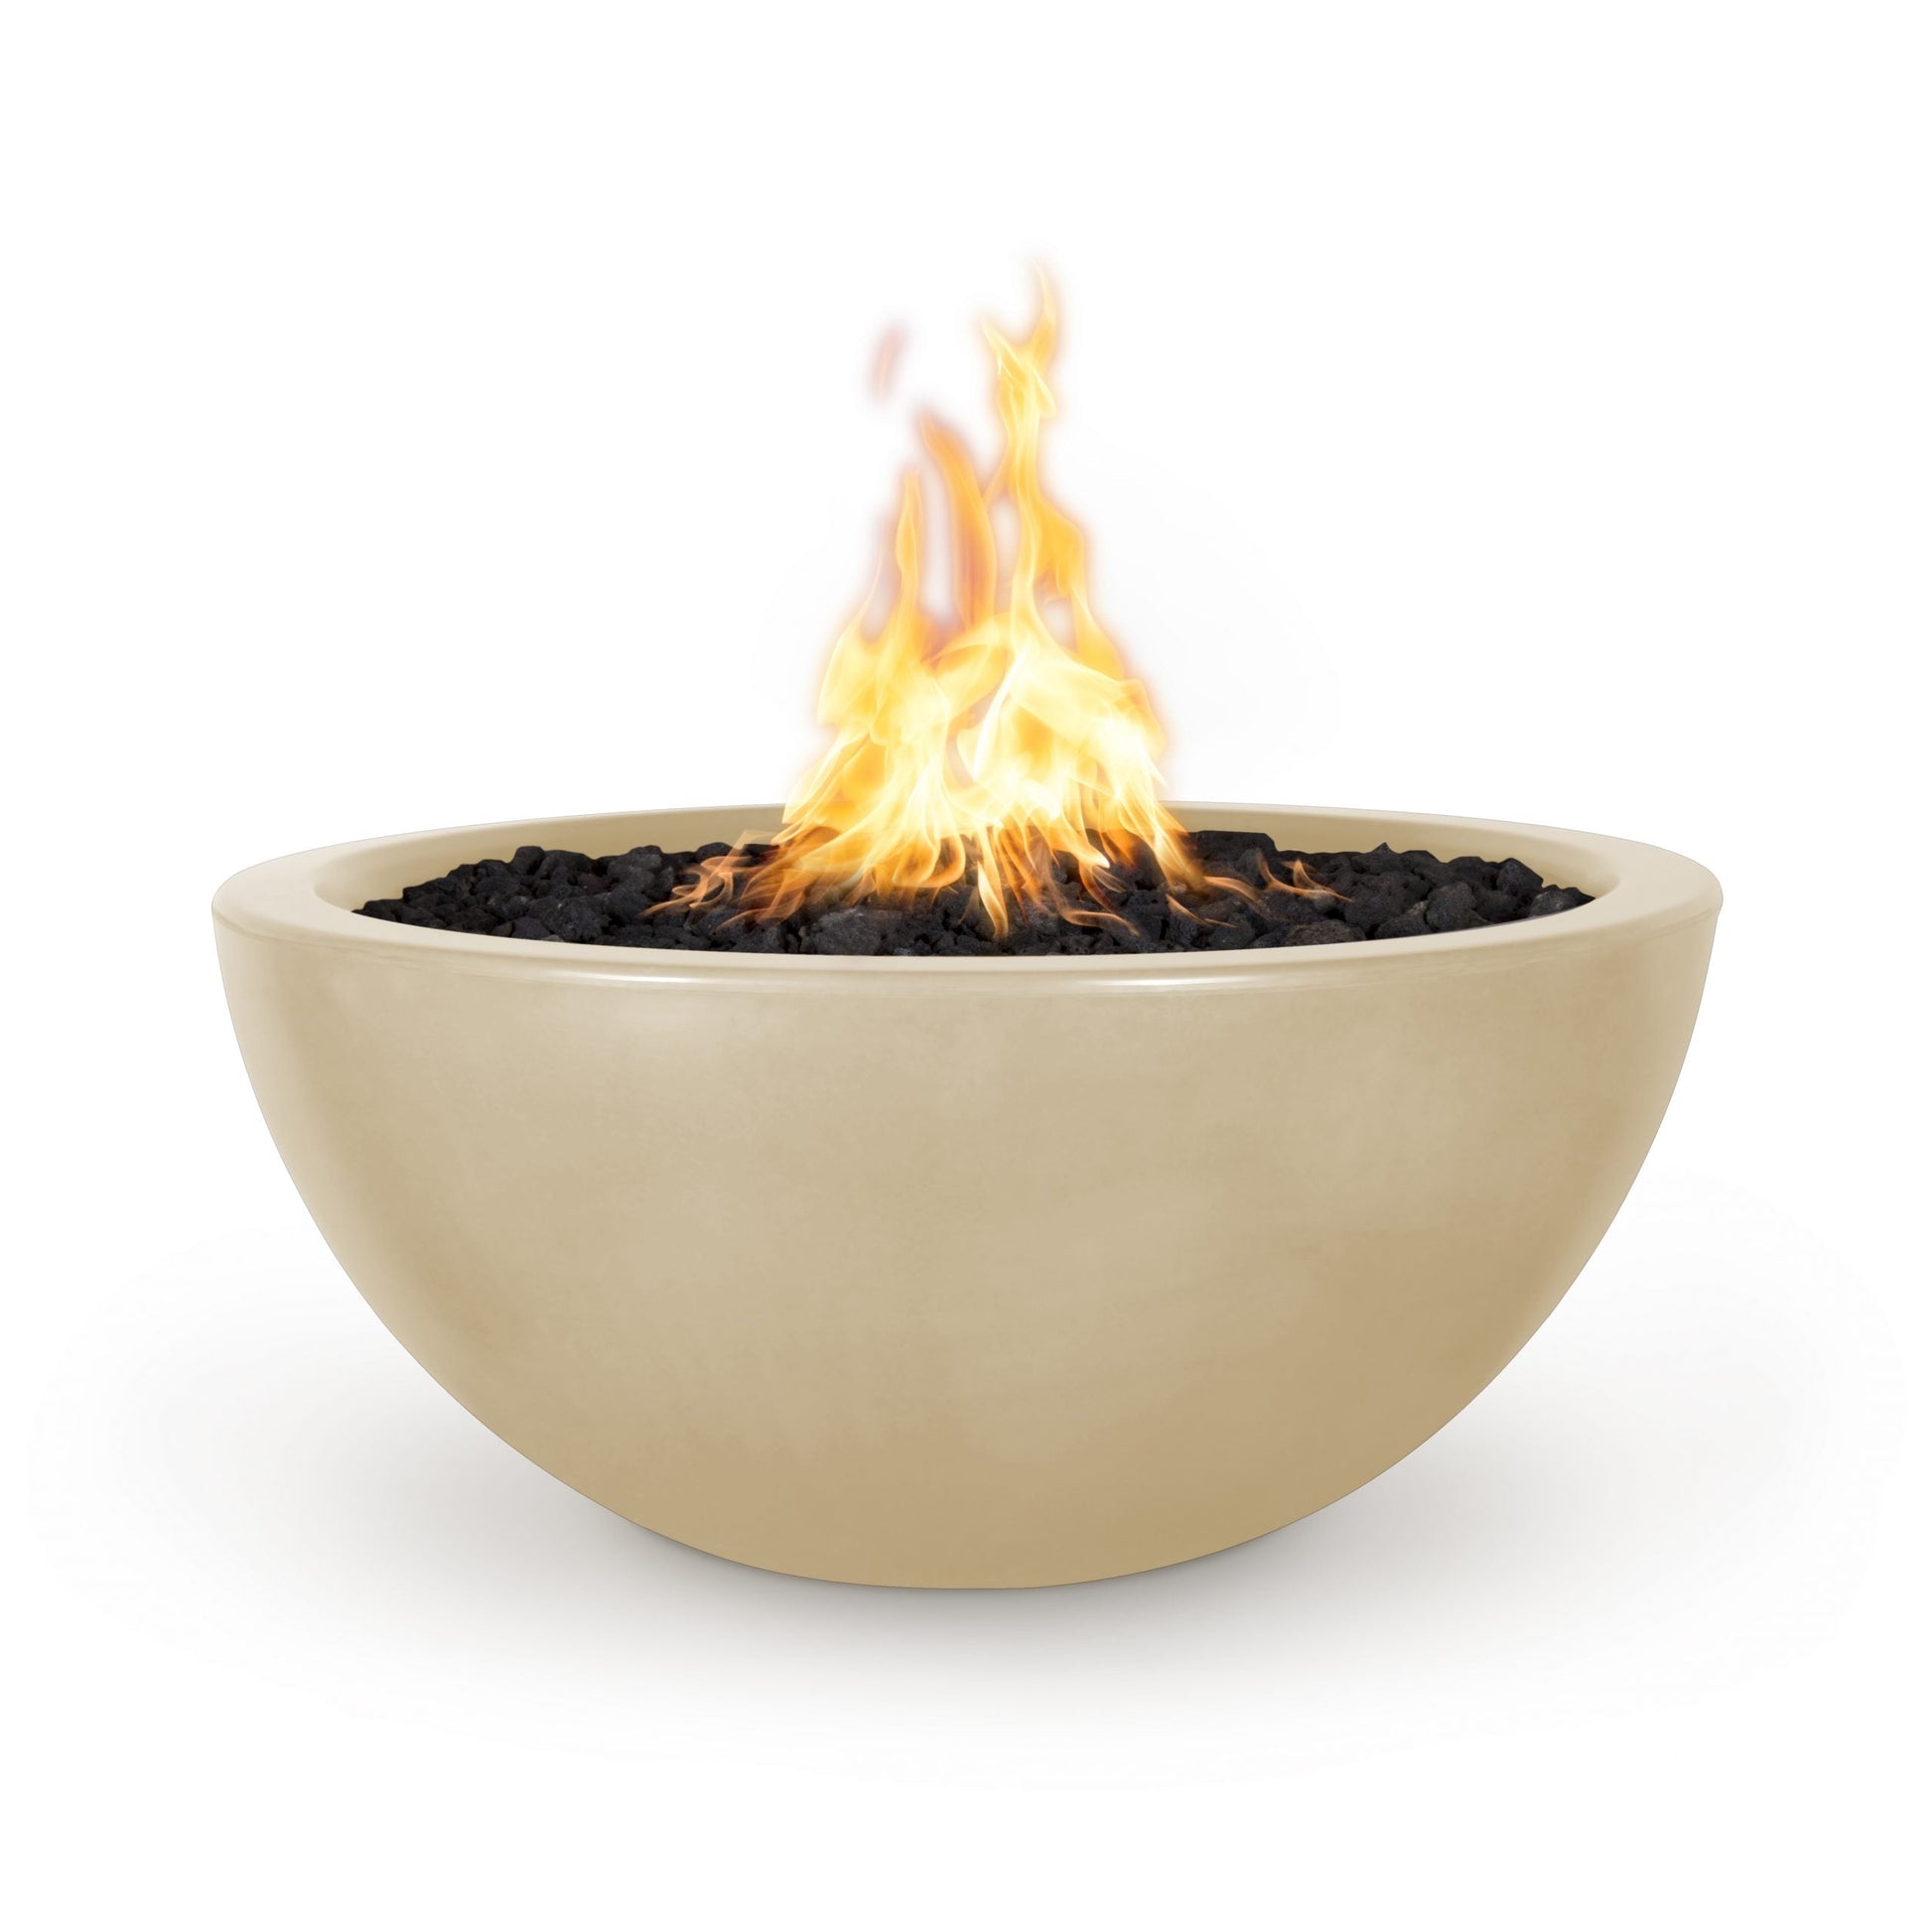 The Outdoor Plus Round Luna 38" Rustic Gray GFRC Concrete Liquid Propane Fire Bowl with Match Lit with Flame Sense Ignition